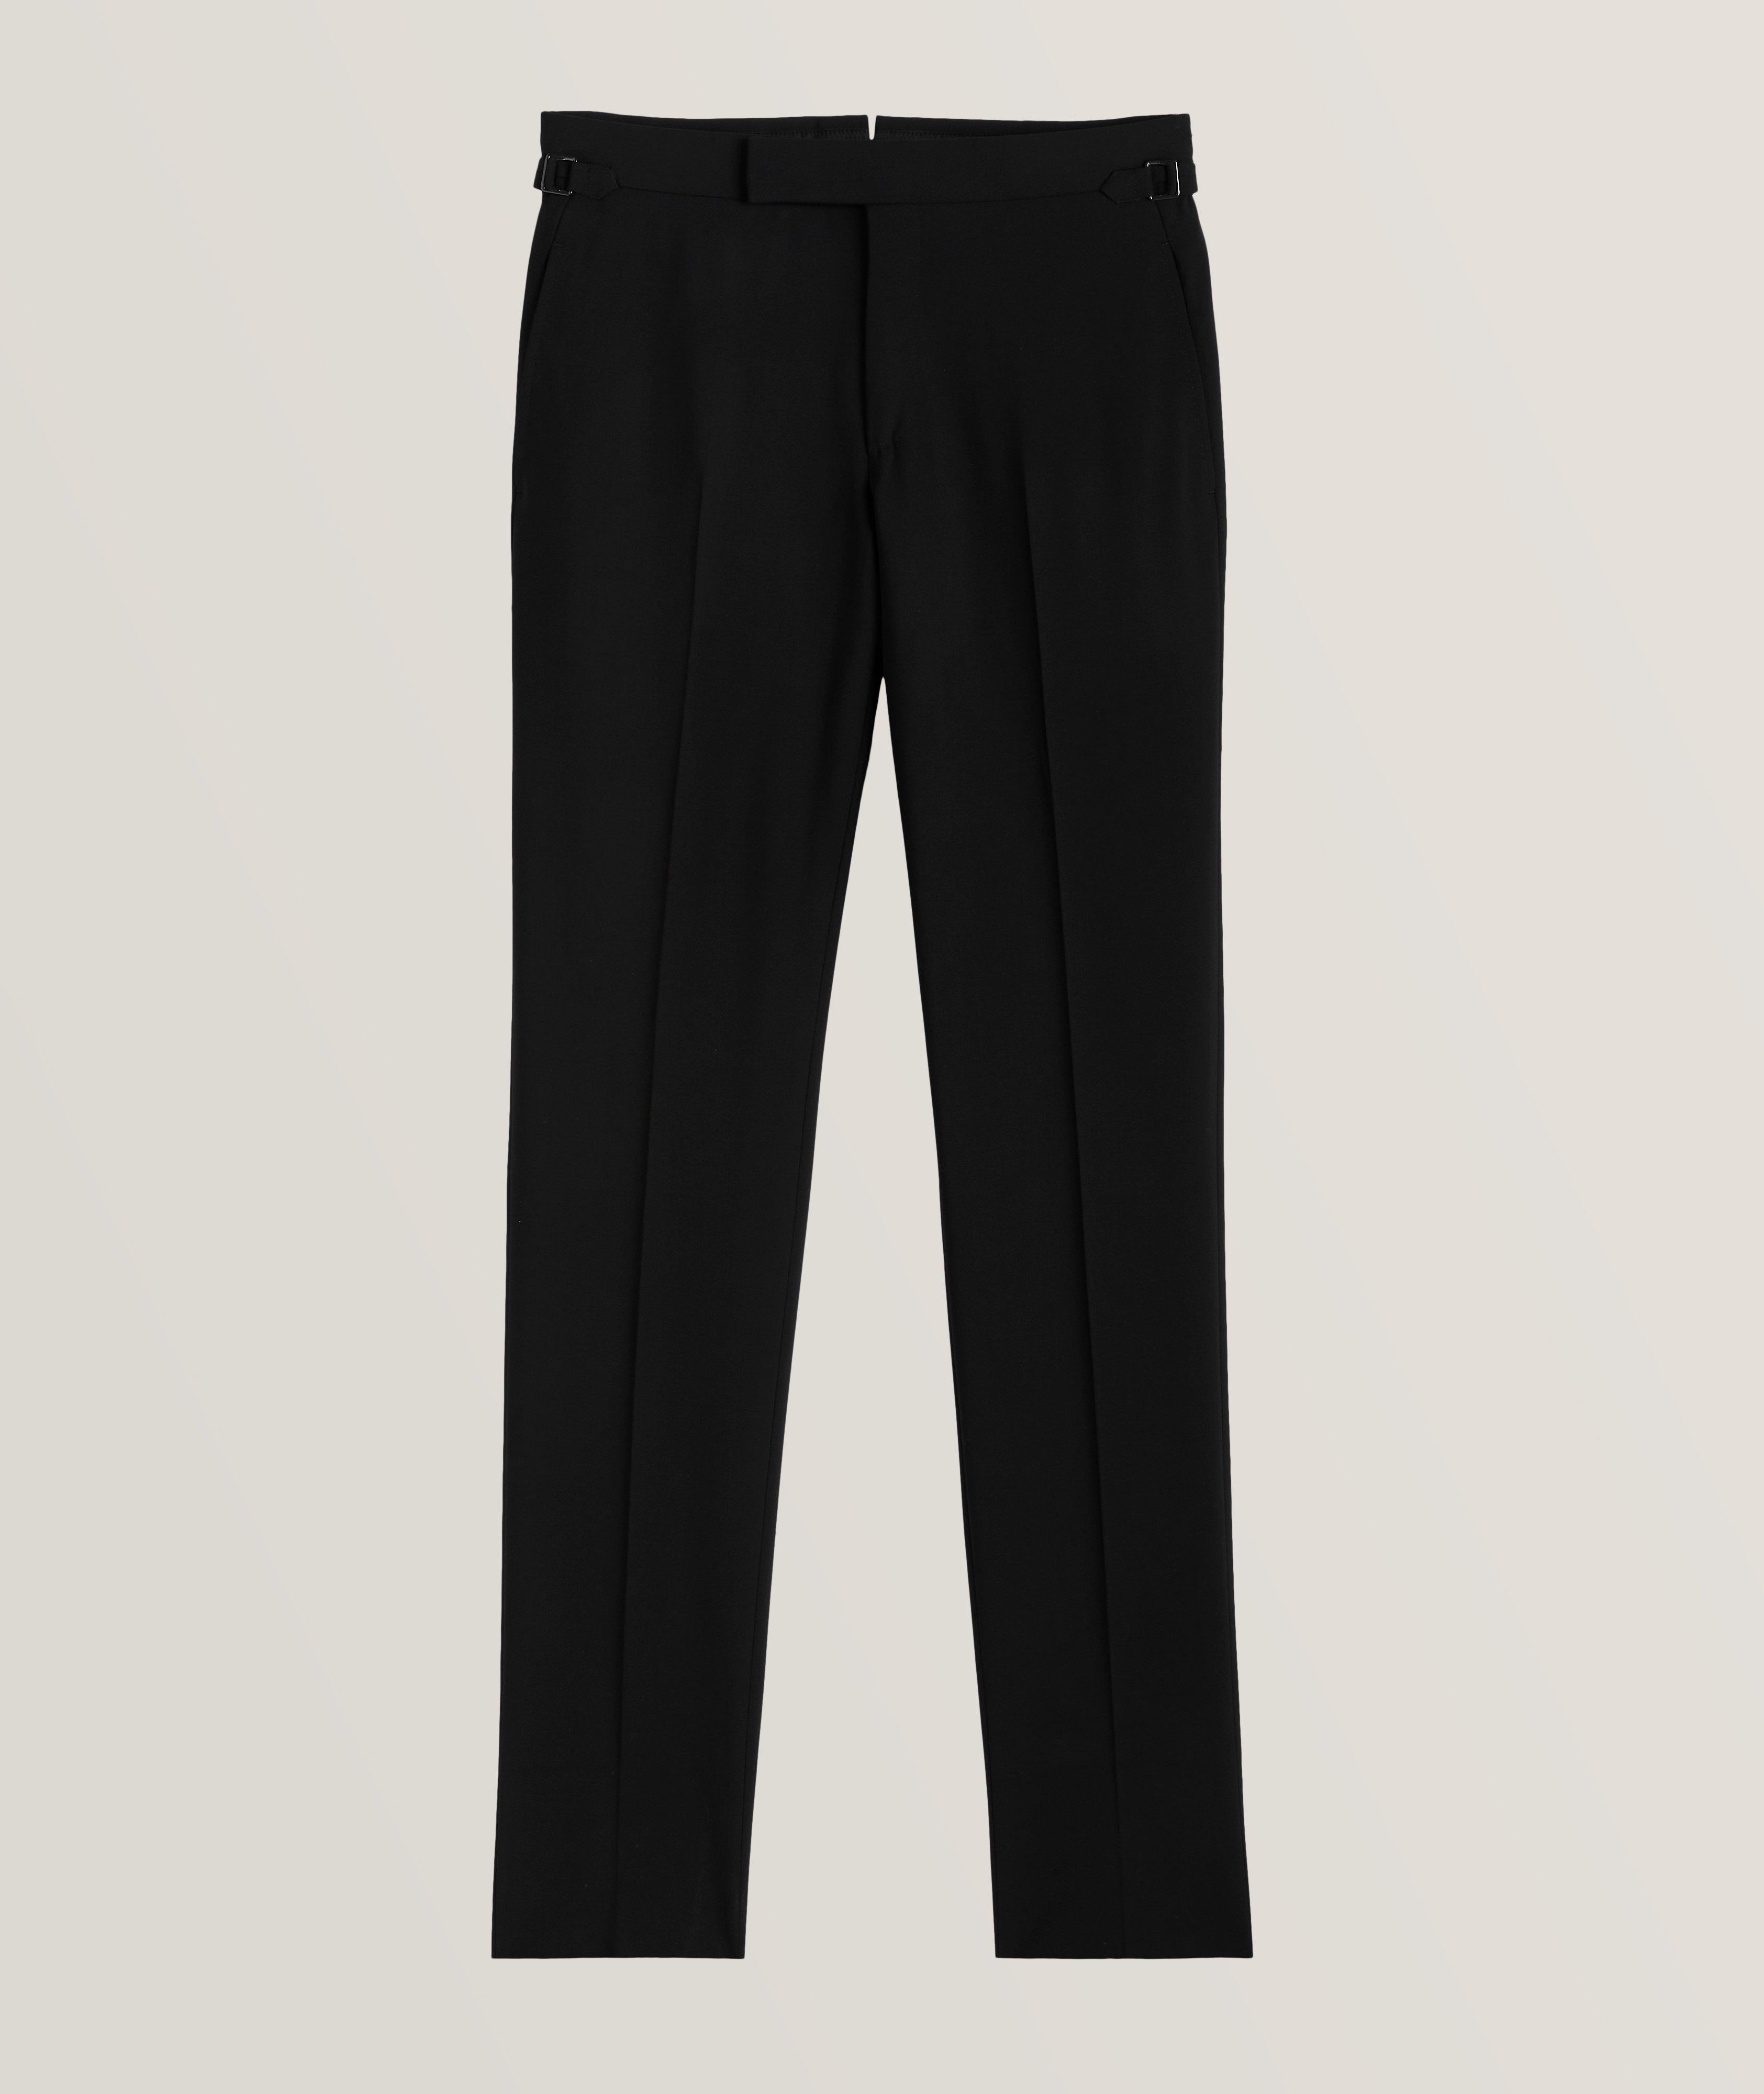 Black O'Connor Super 120s wool suit trousers, Tom Ford